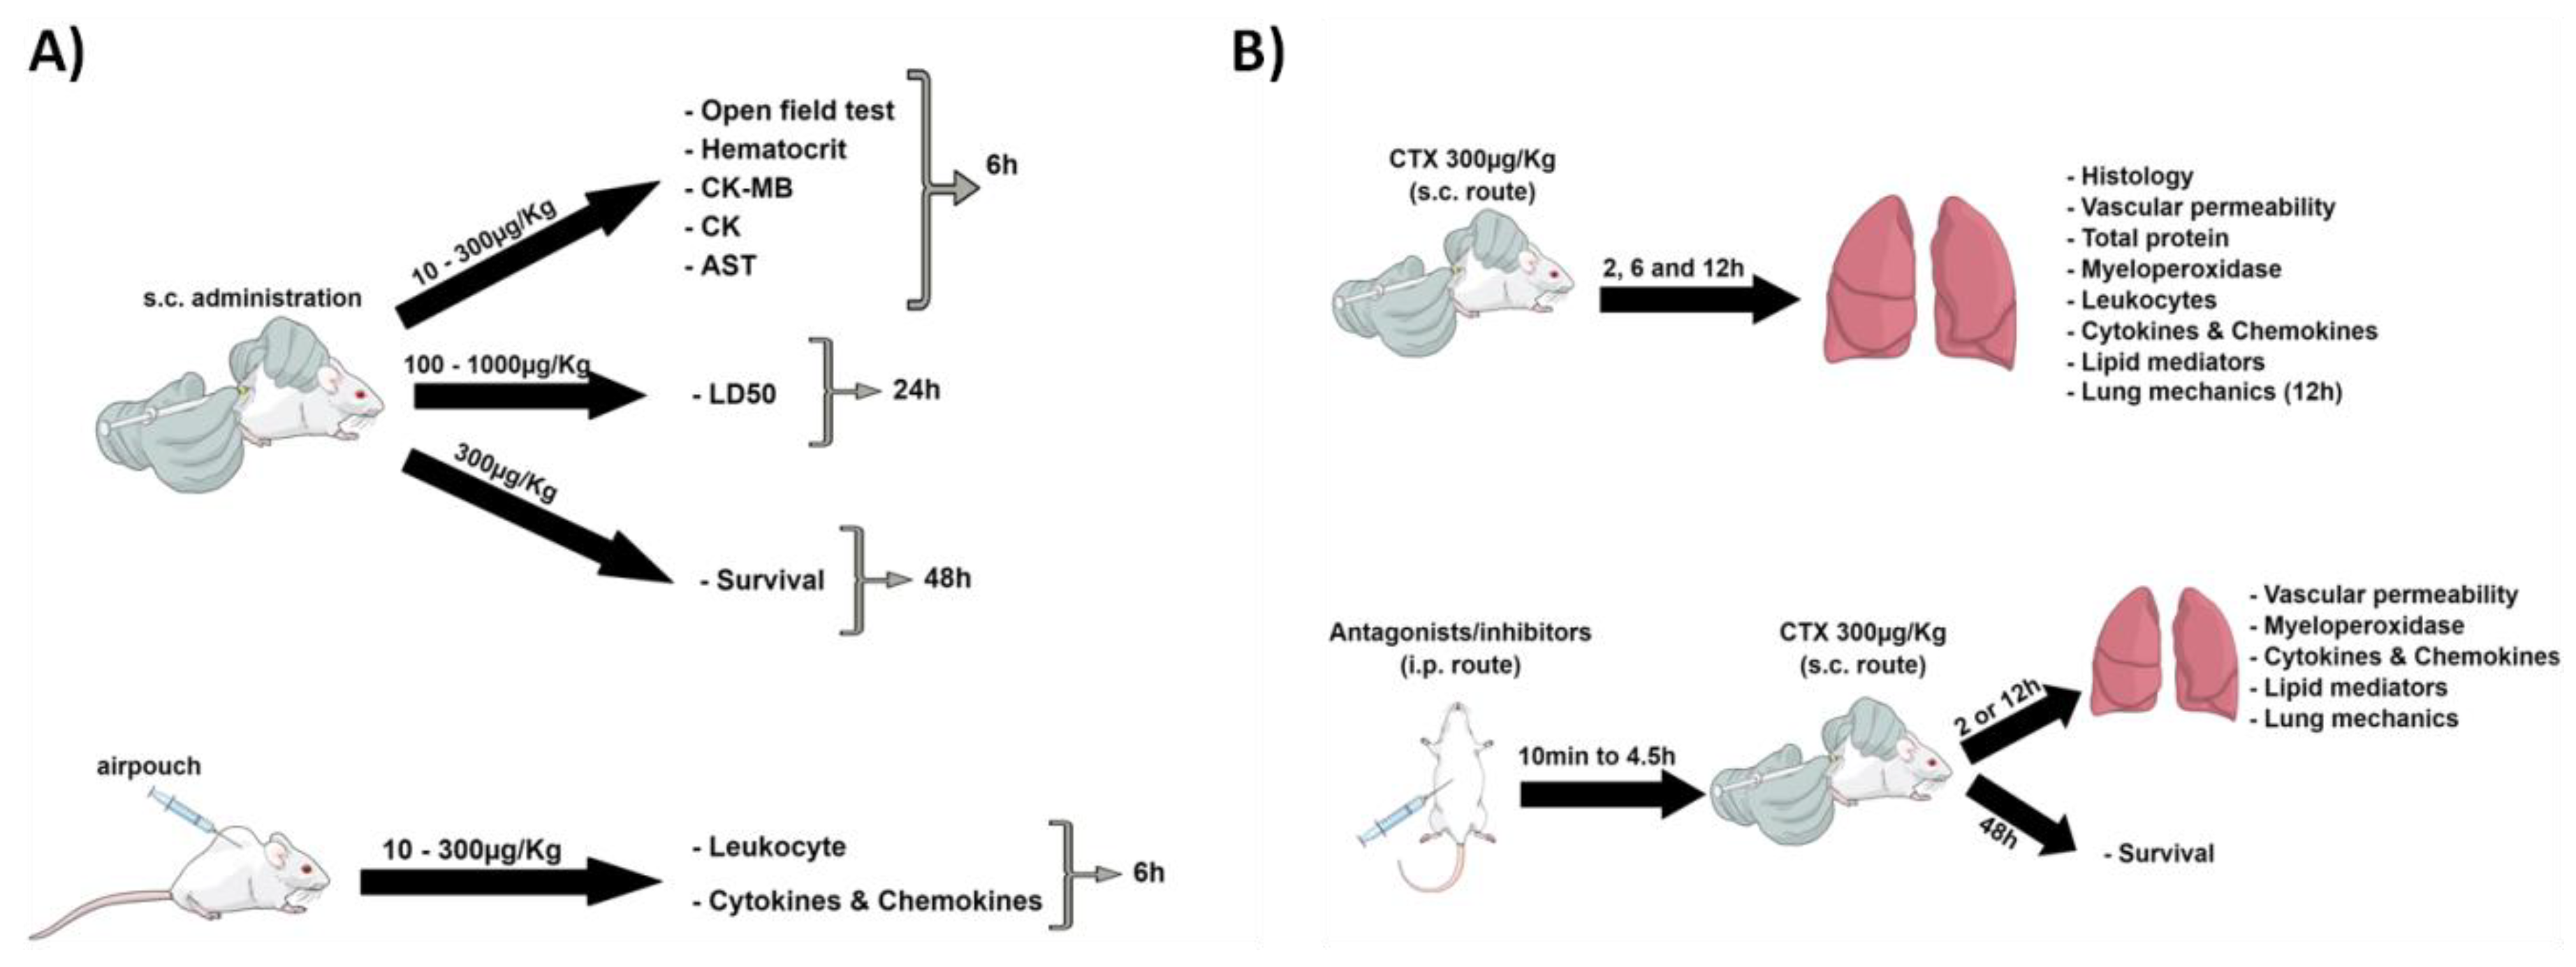 Biomolecules | Free Full-Text | Crotoxin-Induced Mice Lung Impairment: Role  of Nicotinic Acetylcholine Receptors and COX-Derived Prostanoids